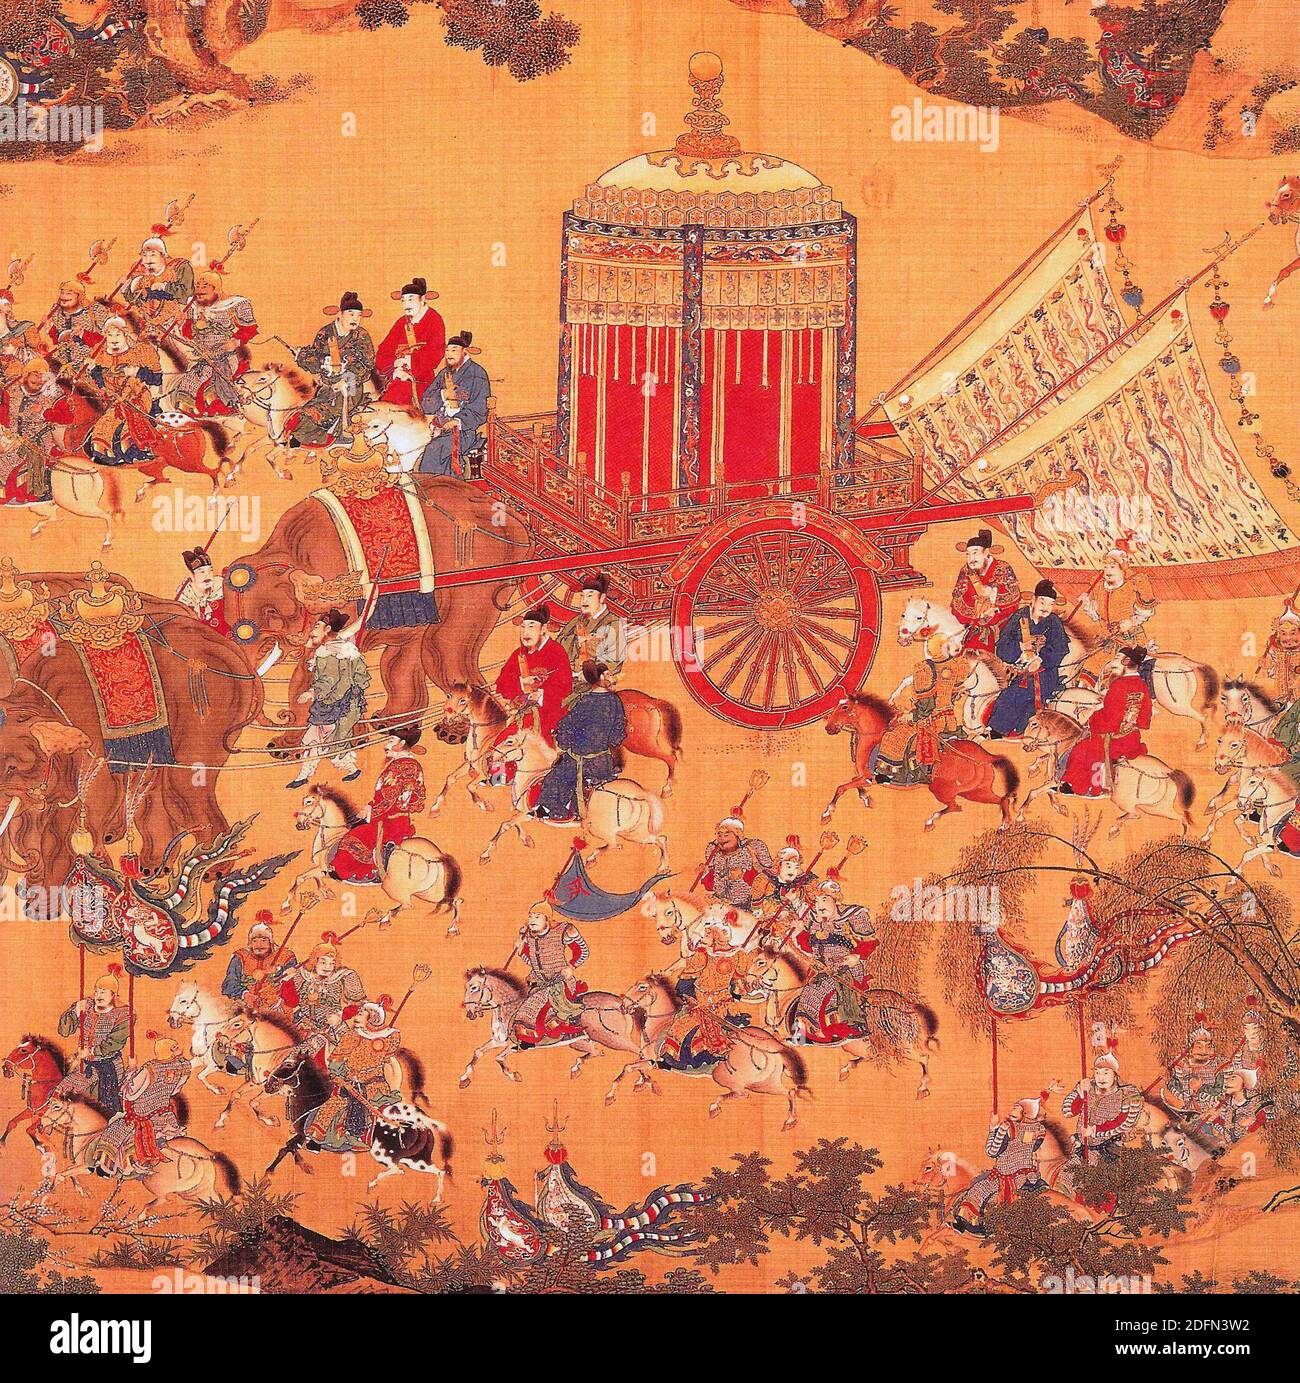 The Emperor's Approach, showing the luxury in which the emperor Xuande travelled. Elephants were kept in the imperial elephant stables until around 1900 and were often used for ceremonial occasions, such as the emperor's visits to the Temple of Heaven. Here, however, the large number of horsemen accompanying the emperor's carriage suggests that the emperor was on a much longer journey in the countryside Stock Photo